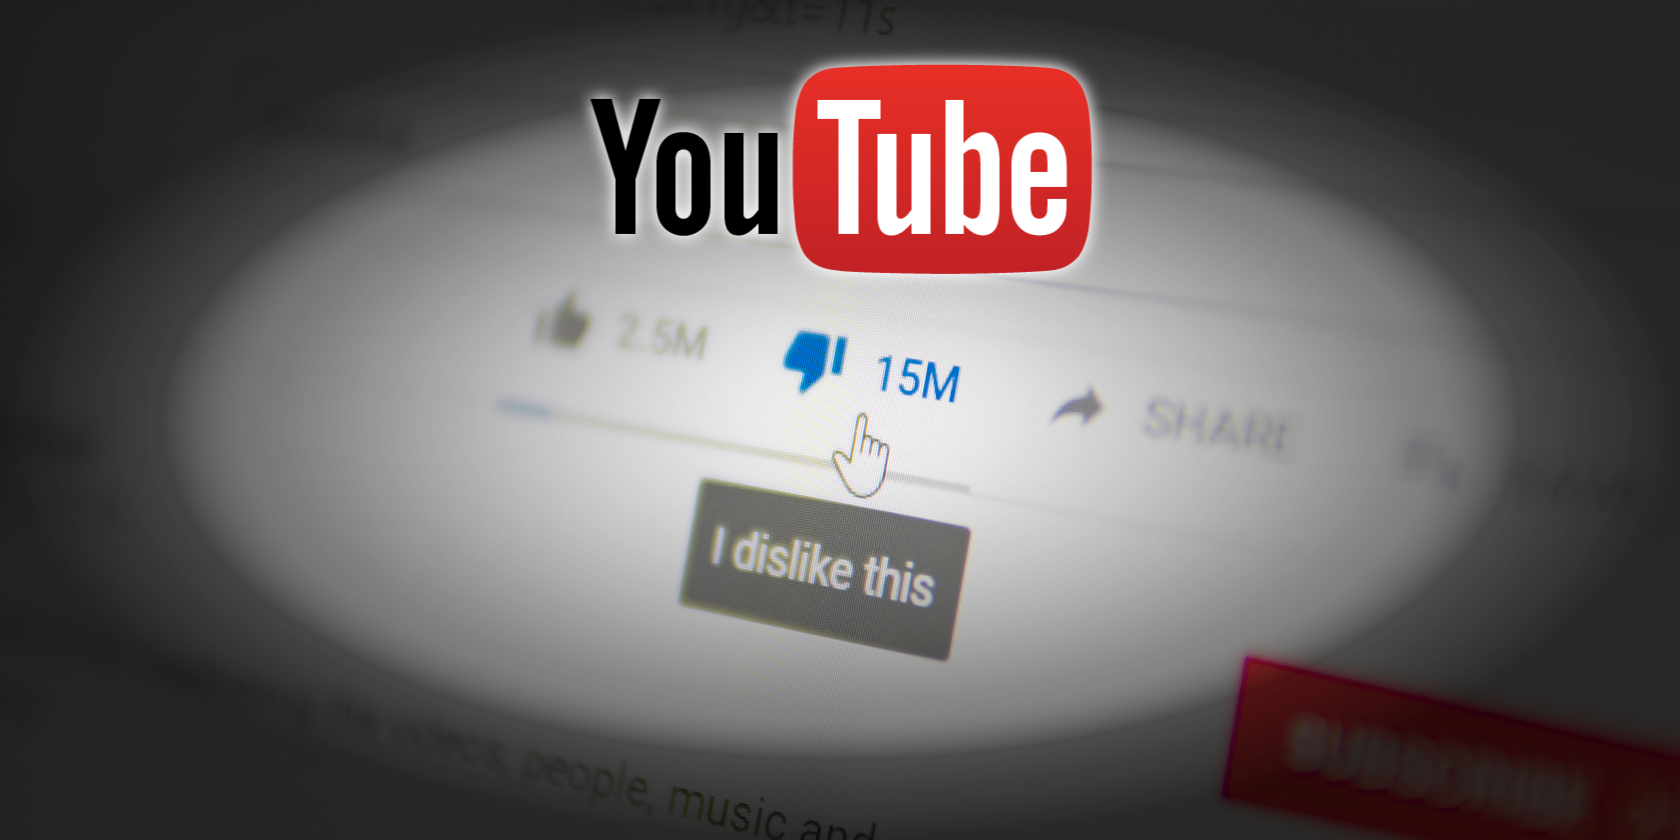 The removal of ‘dislike' button on YouTube will play into the hands of progressive woke inquisitions attempting to fundamentally change American society.